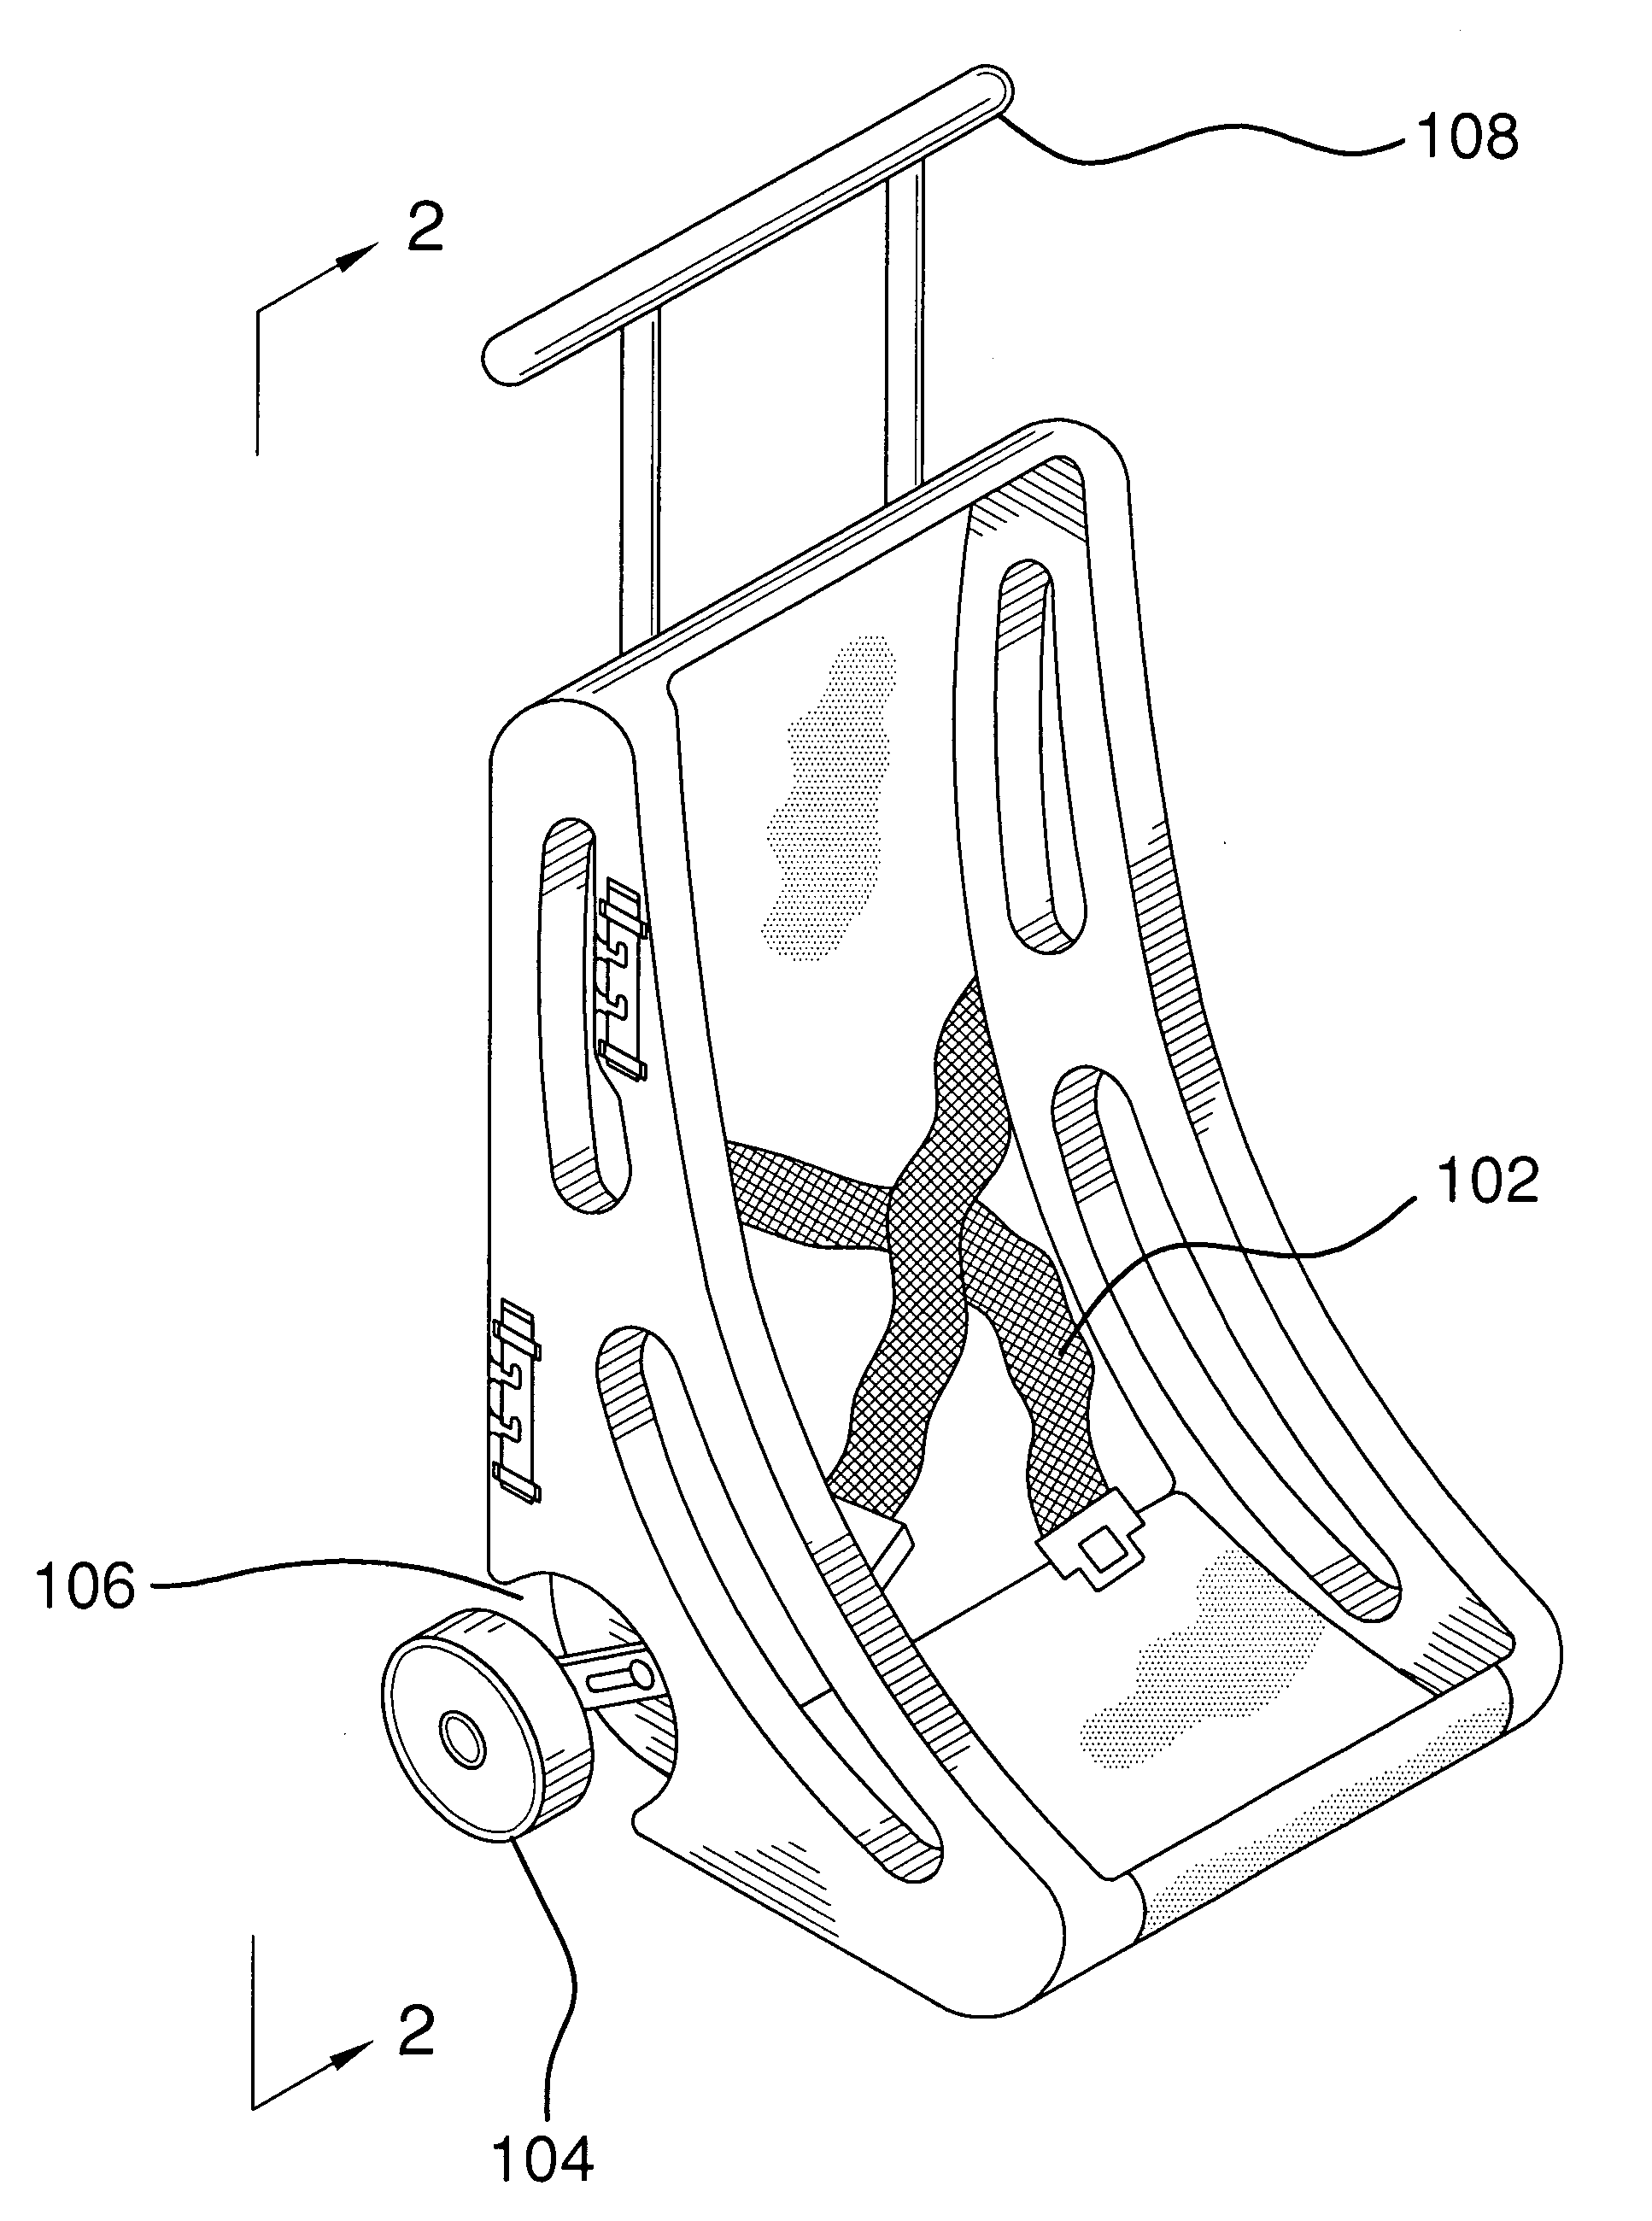 Apparatus for an integrated child restraint seat and transport for carry on luggage